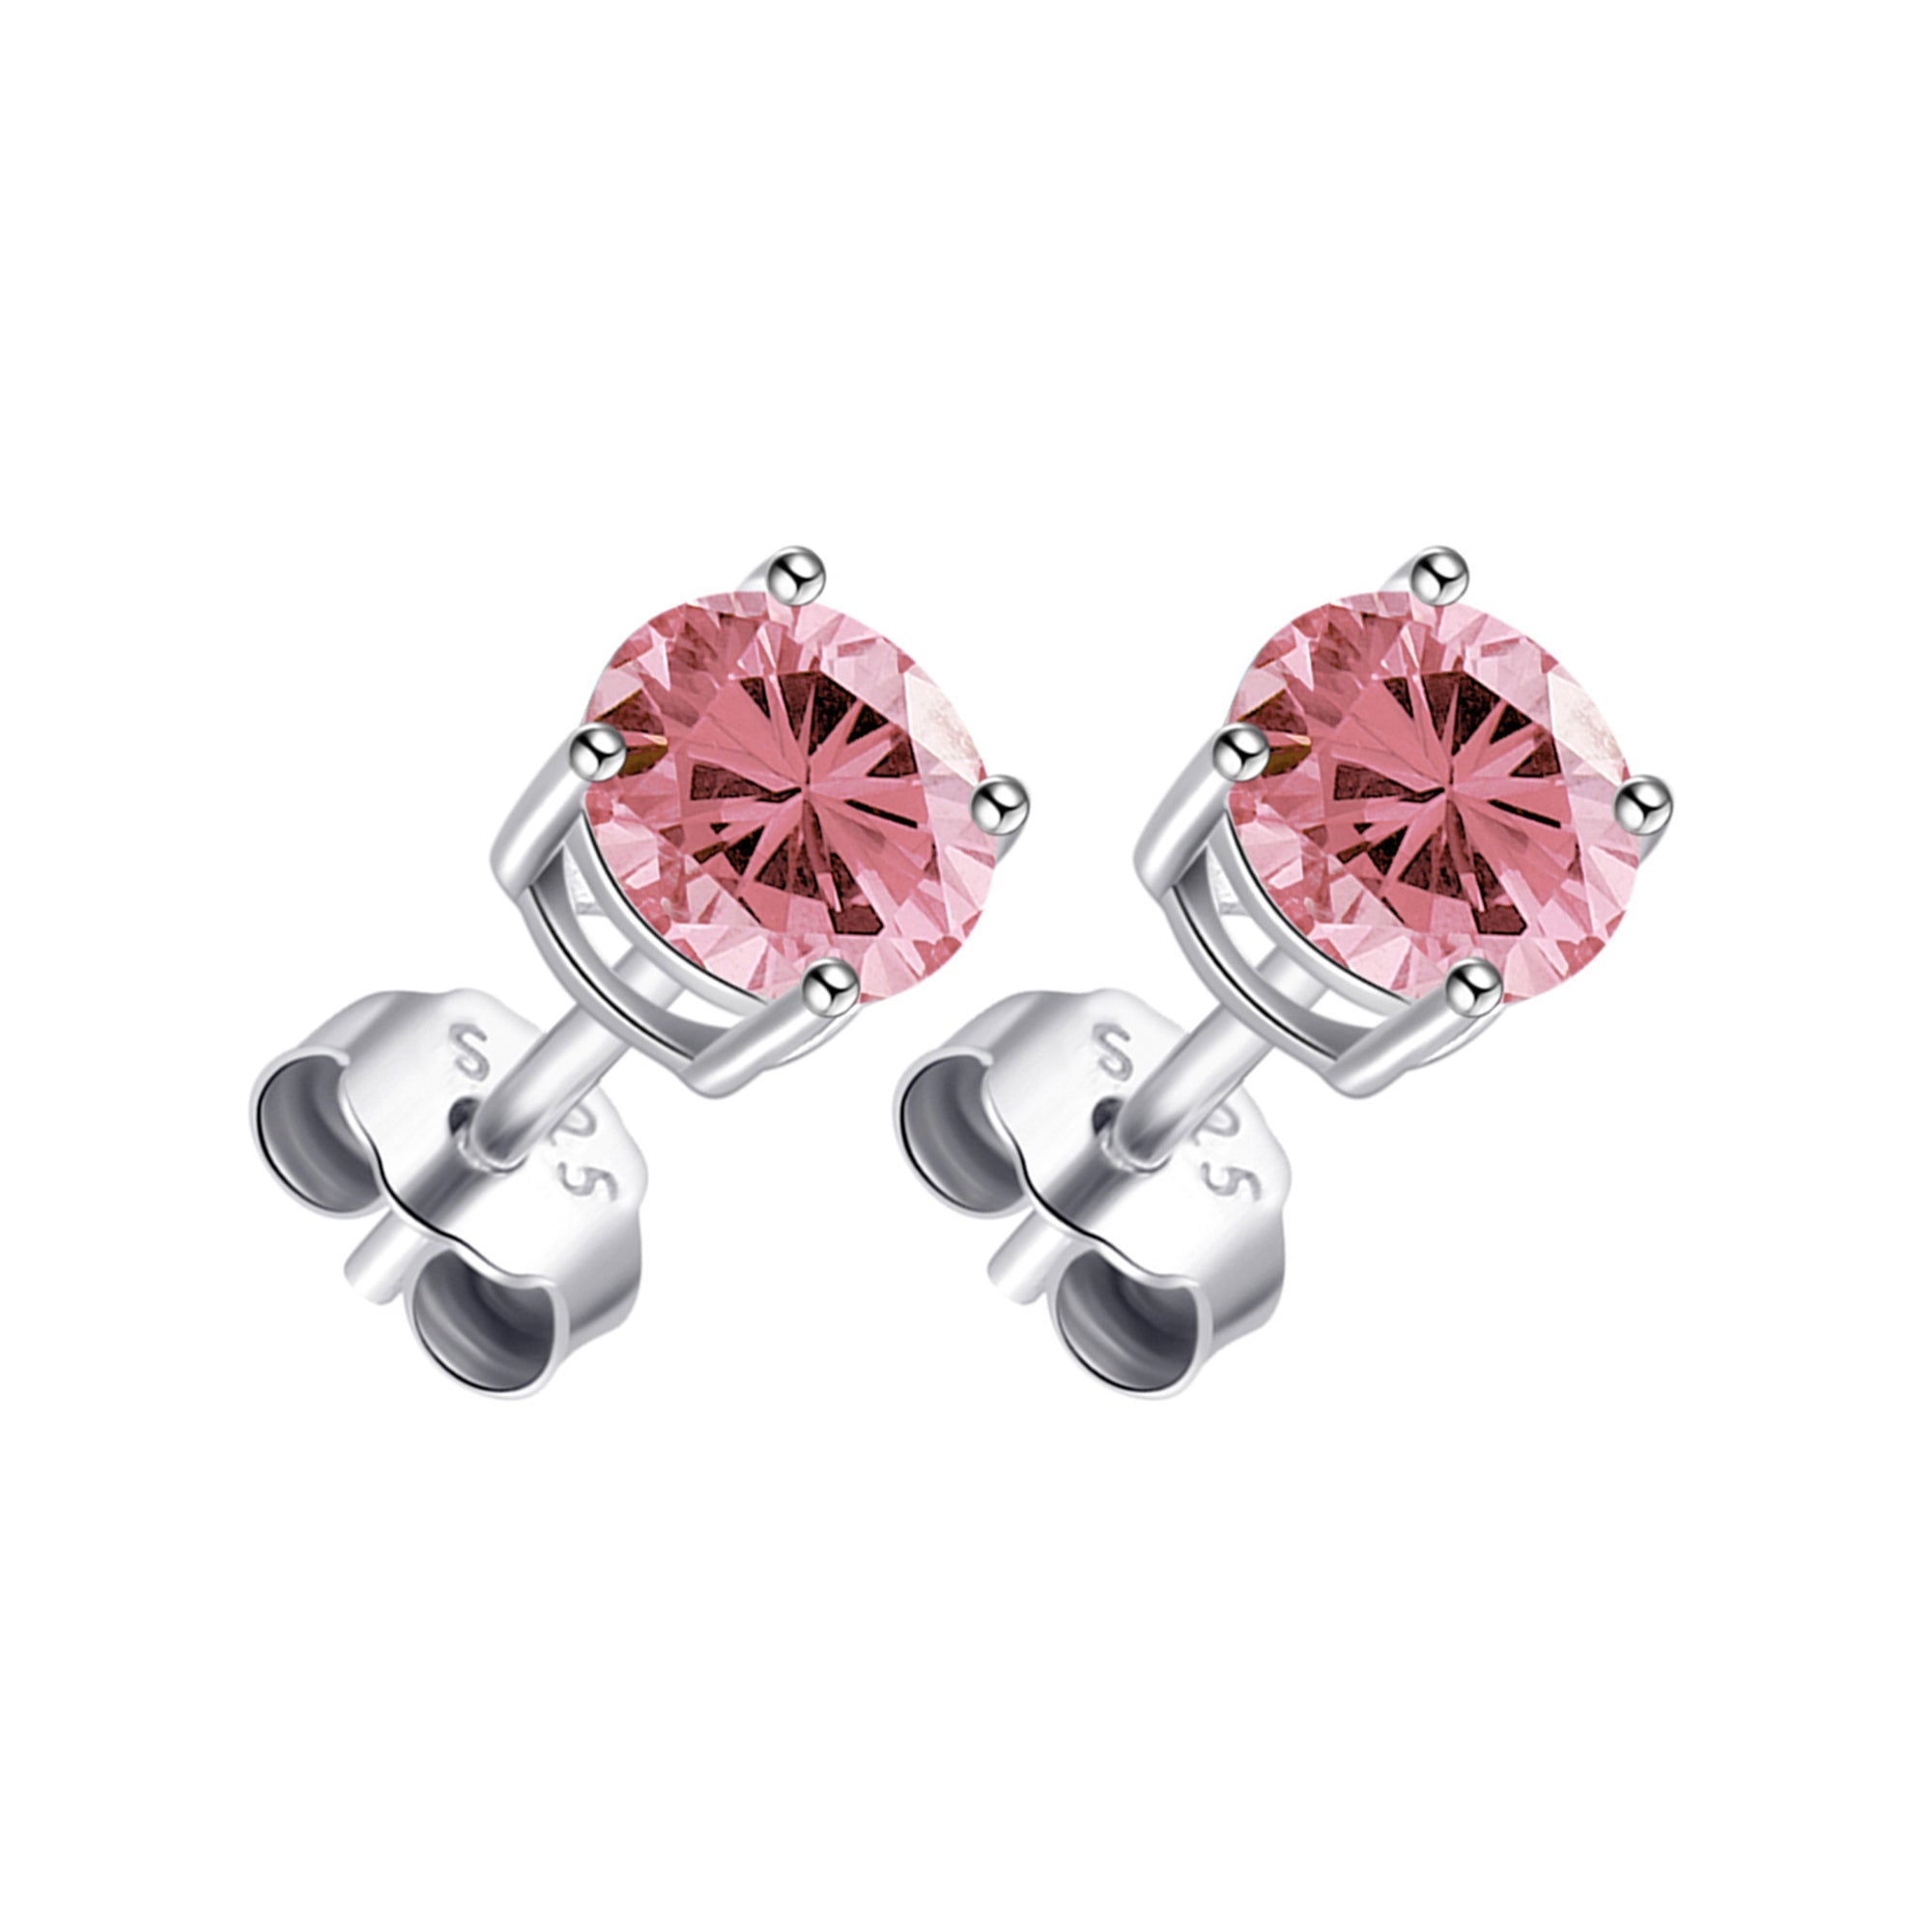 Sterling Silver Pink Earrings Created with Zircondia® Crystals by Philip Jones Jewellery